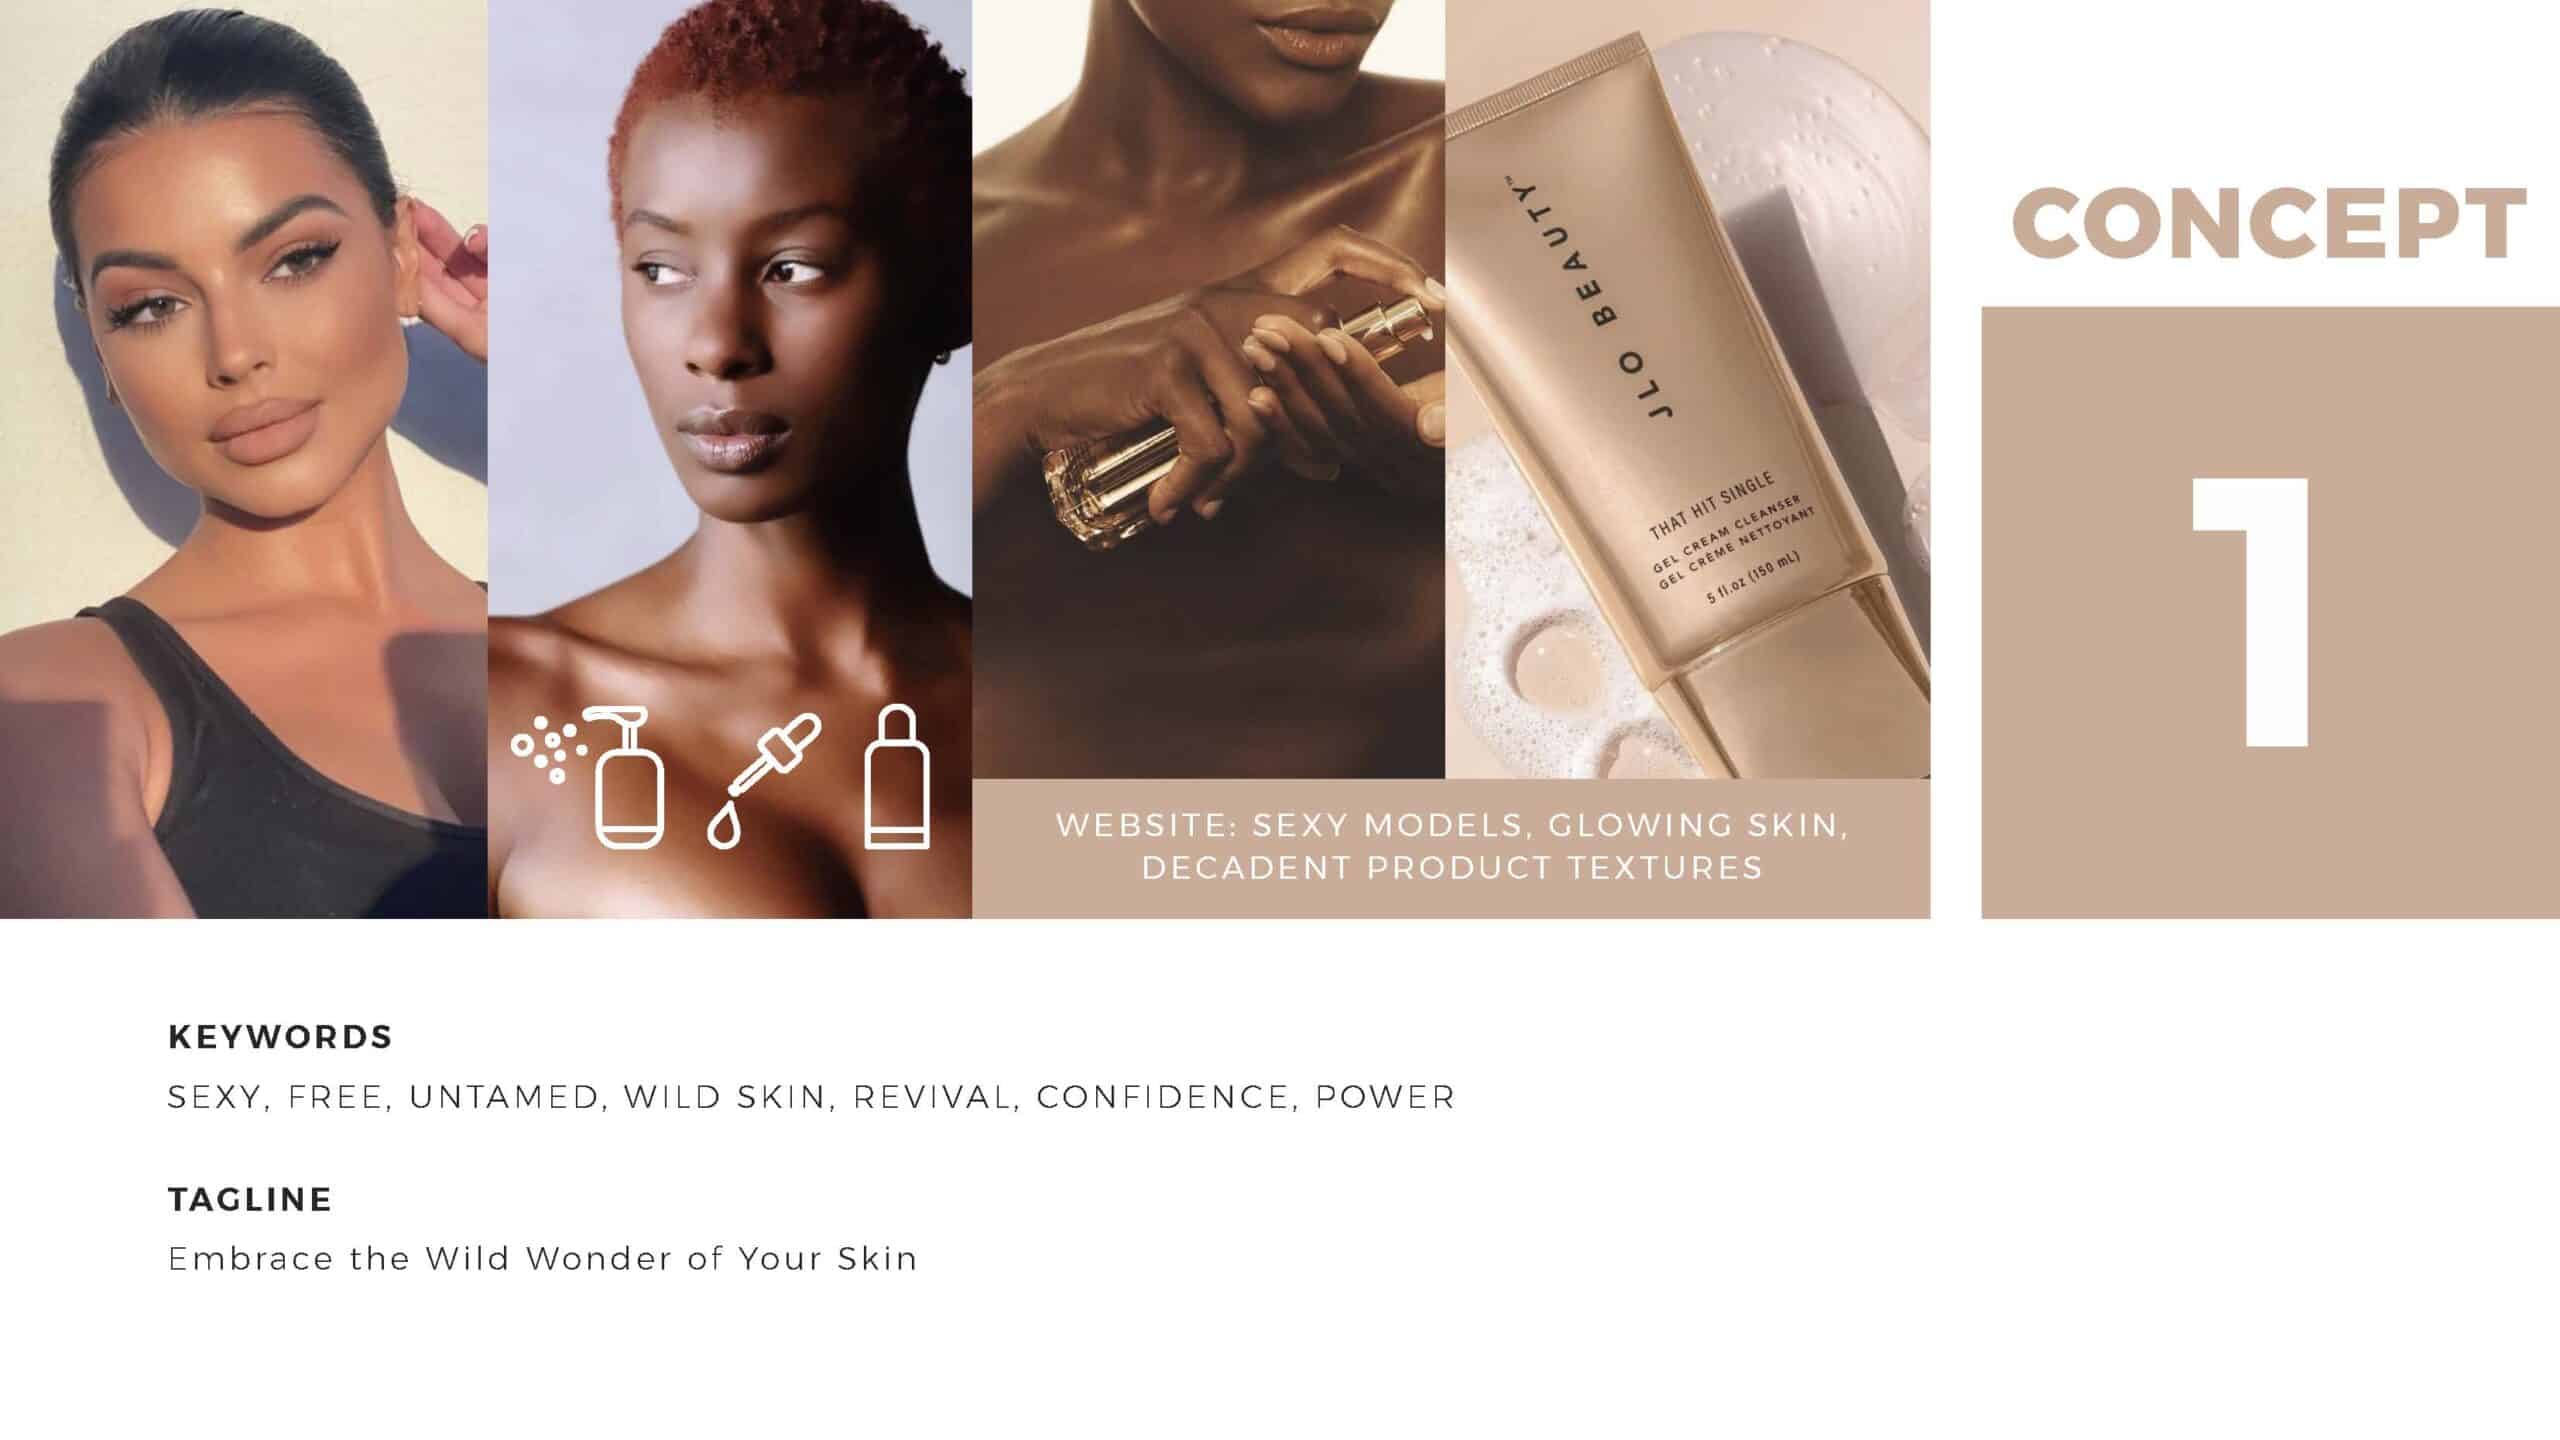 Skin Sauvage skin care packaging moodboard branding concept.